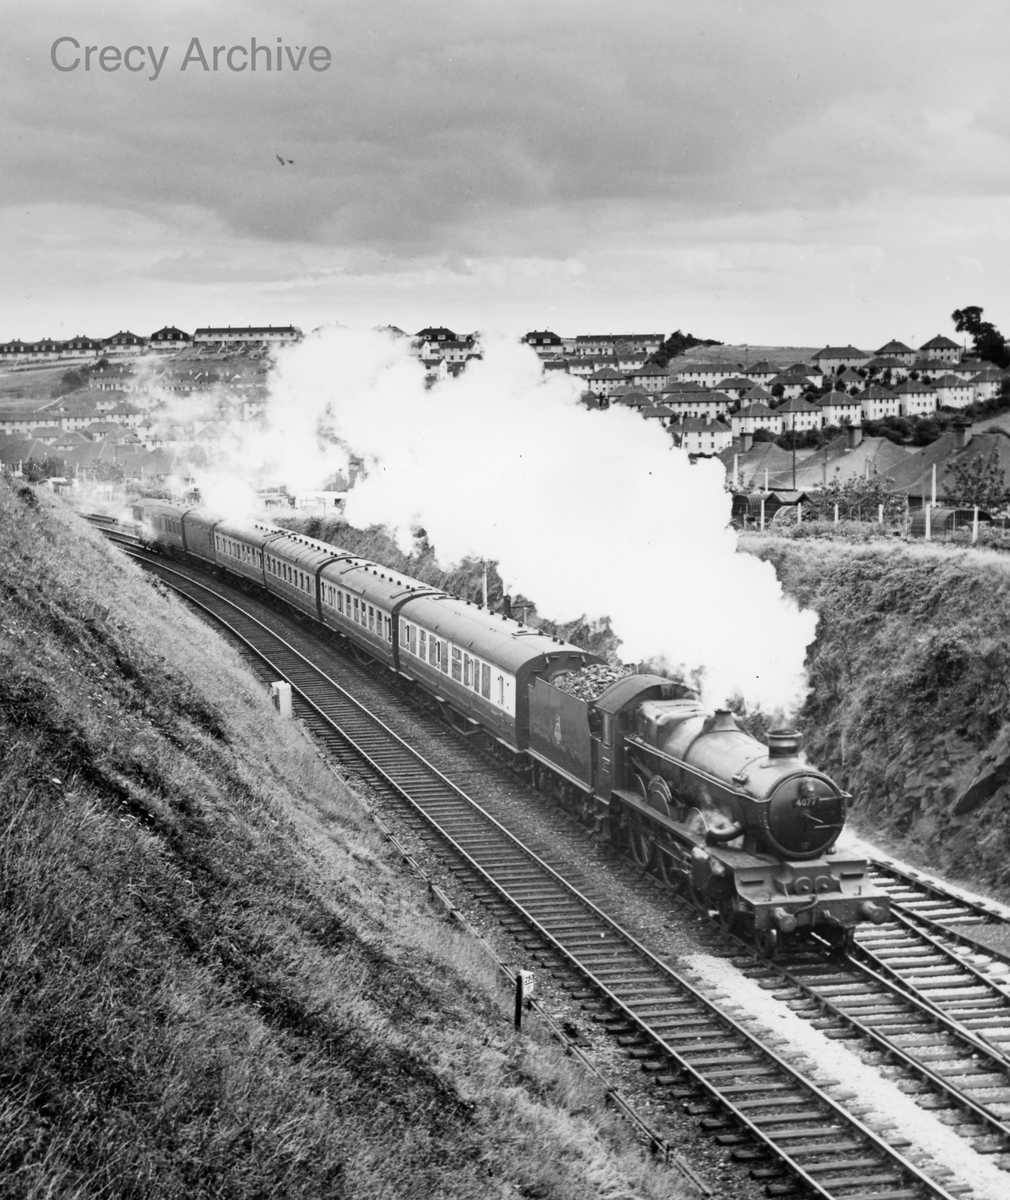 One of the very first batch of GWR Castles, dating from 1923, No 4077 Chepstow Castle, is in charge of a Plymouth to Penzance stopping service seen near St Budeaux on the outskirts of Plymouth, on 31 July 1956